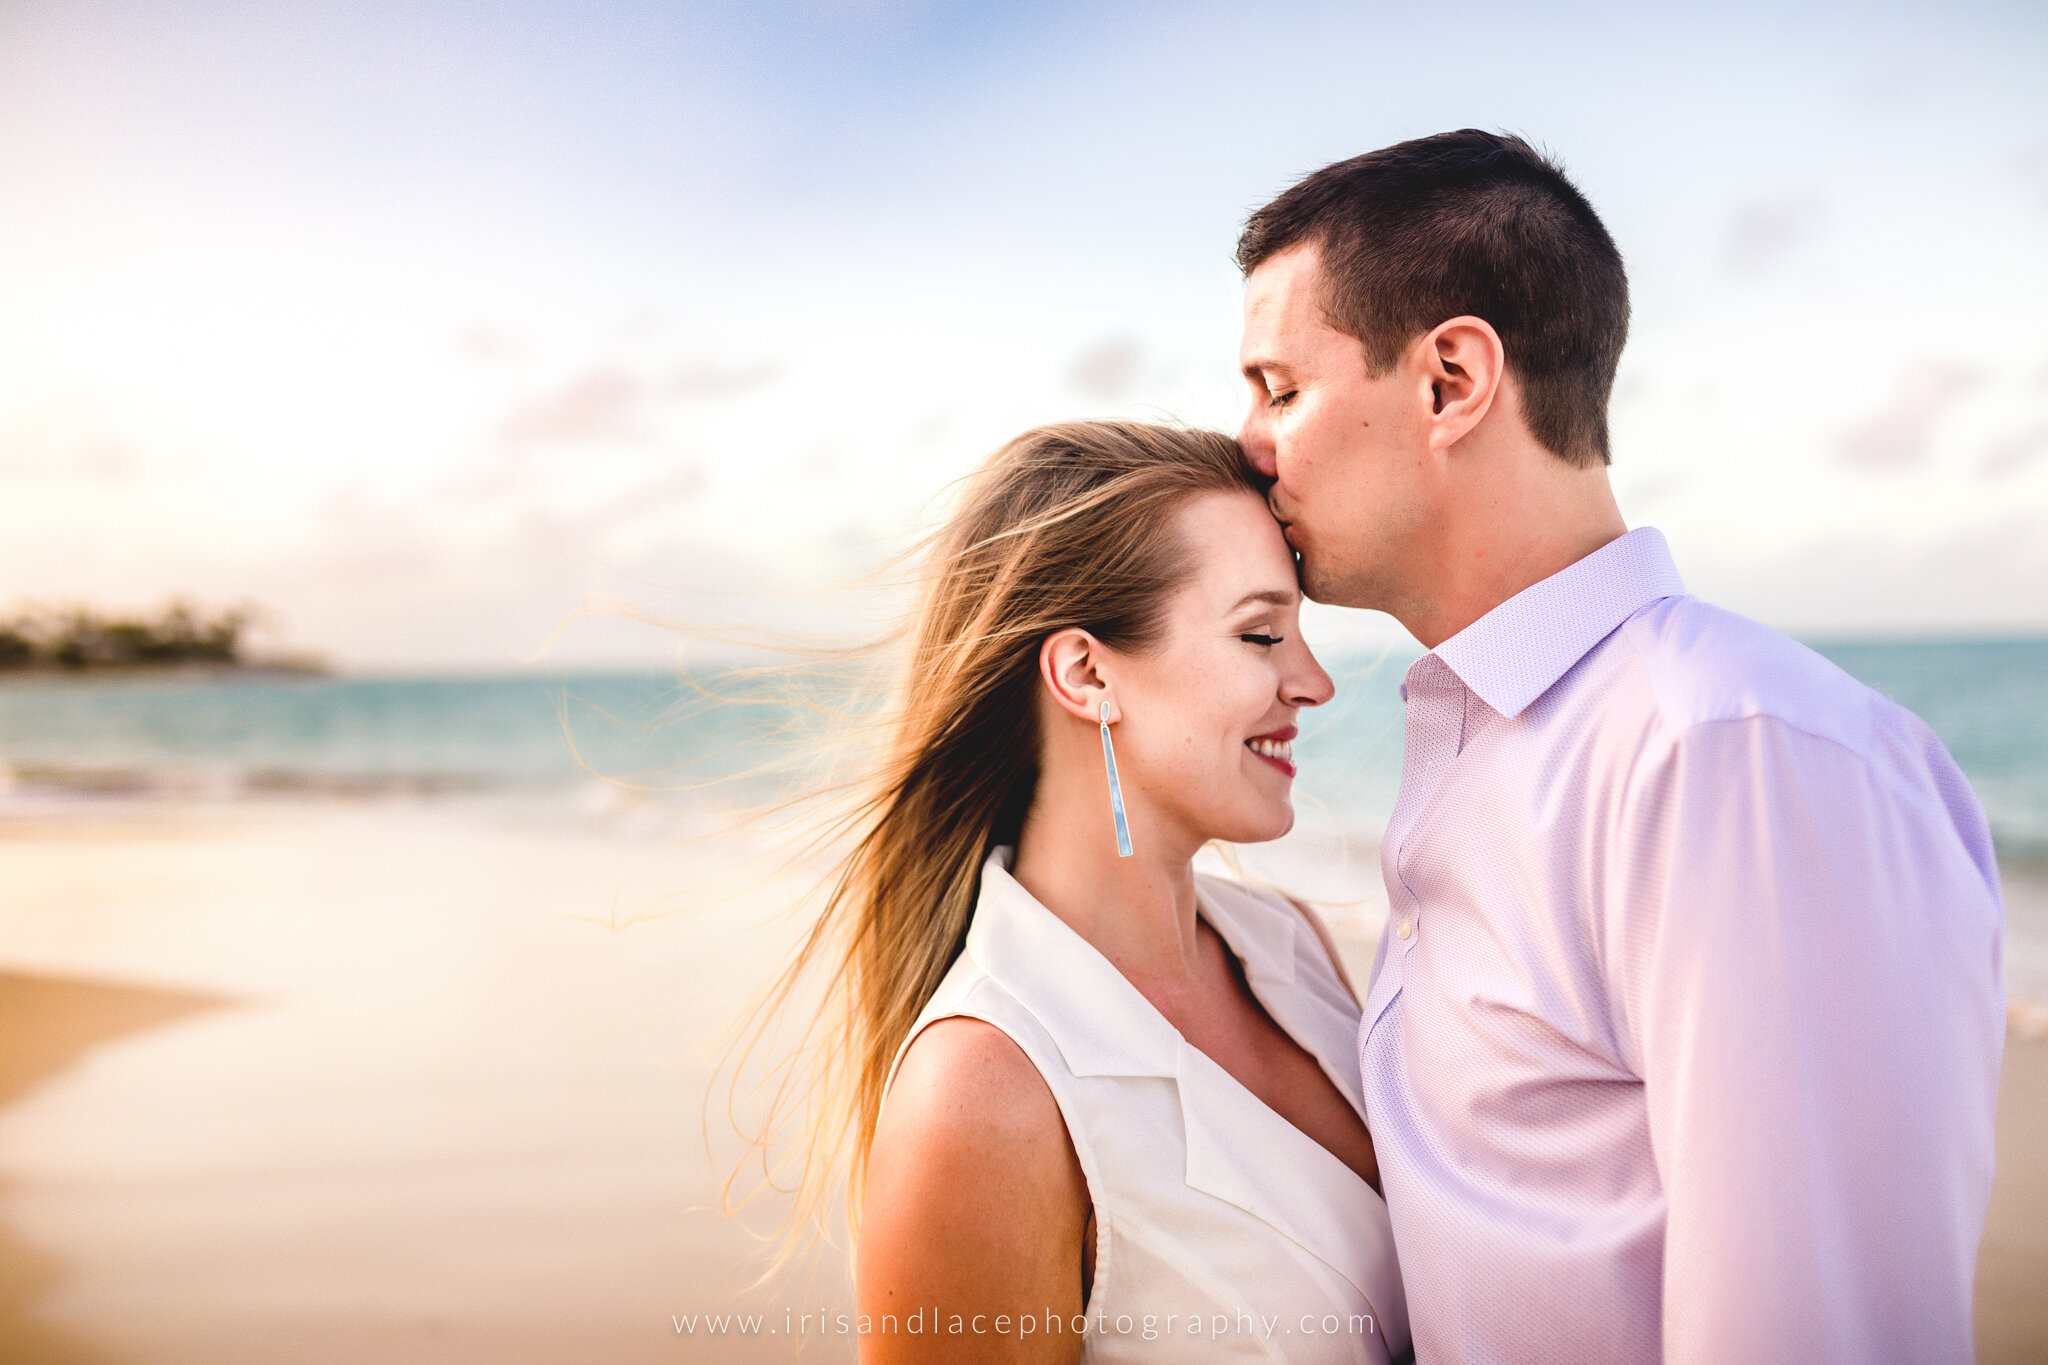 Engagement Photography at the Beach  |  Iris and Lace Photography